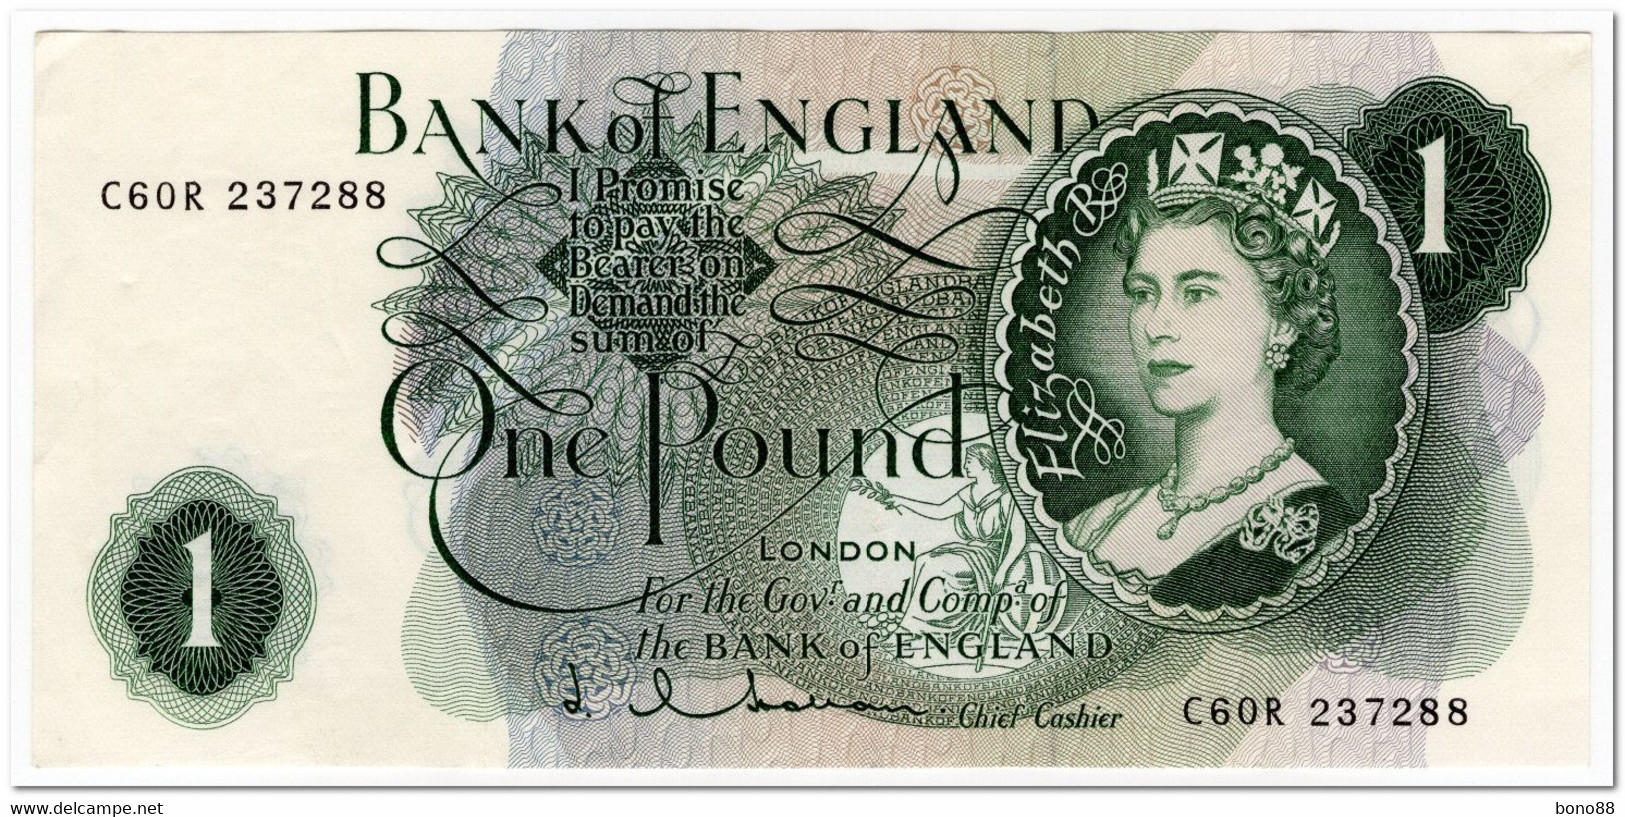 GREAT BRITAIN,BANK OF ENGLAND,1 POUND,1962-66,P.374c,VF-XF - 1 Pond